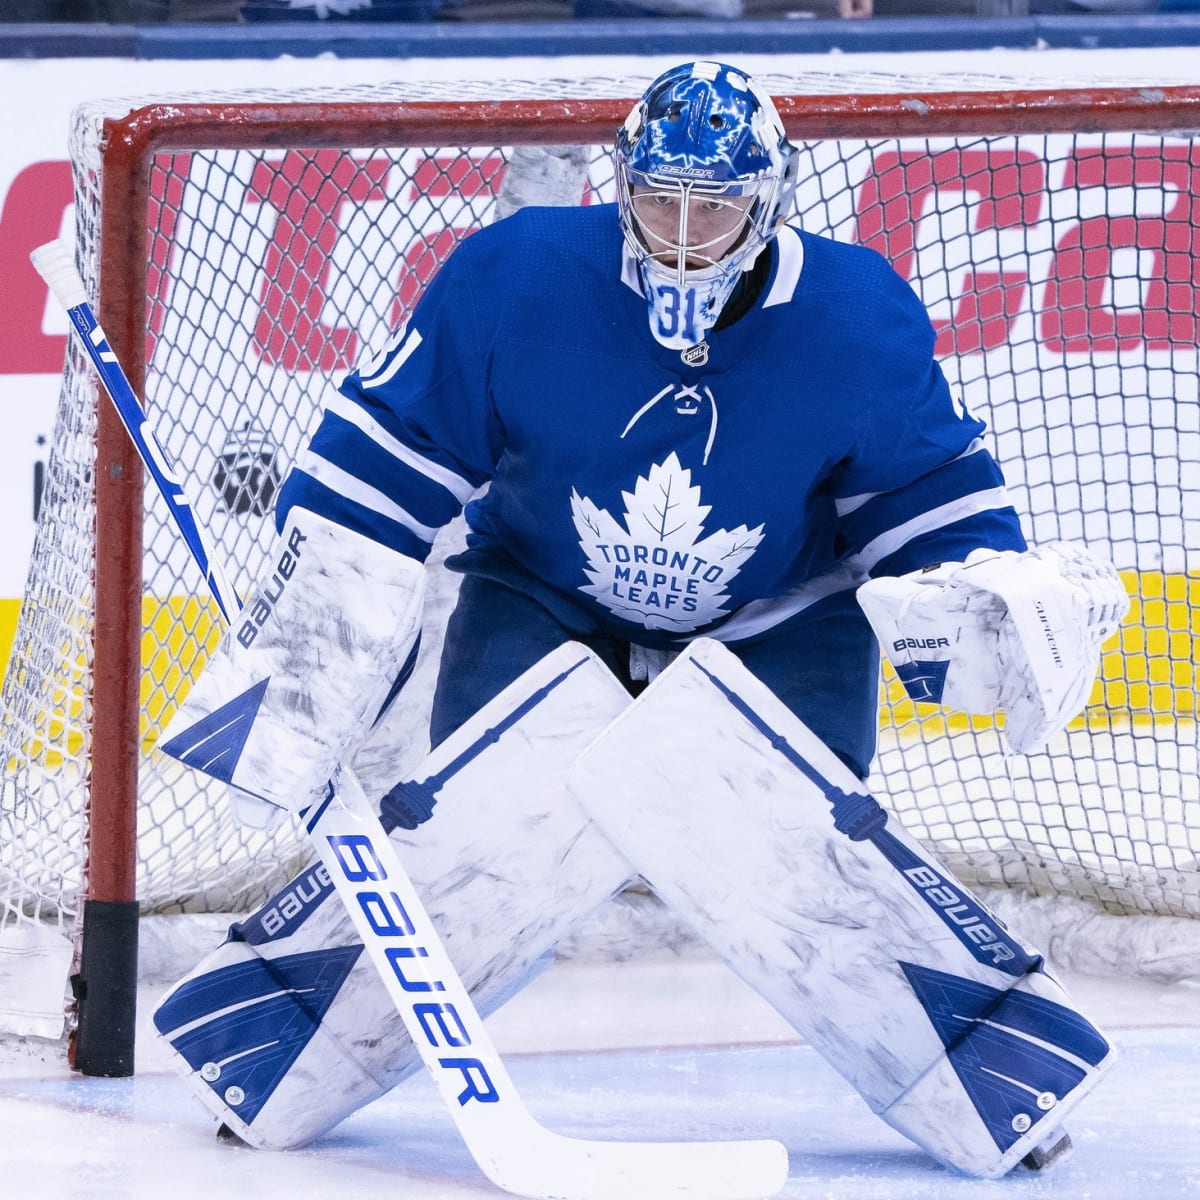 At least one team has interest in Maple Leafs goalie Frederik